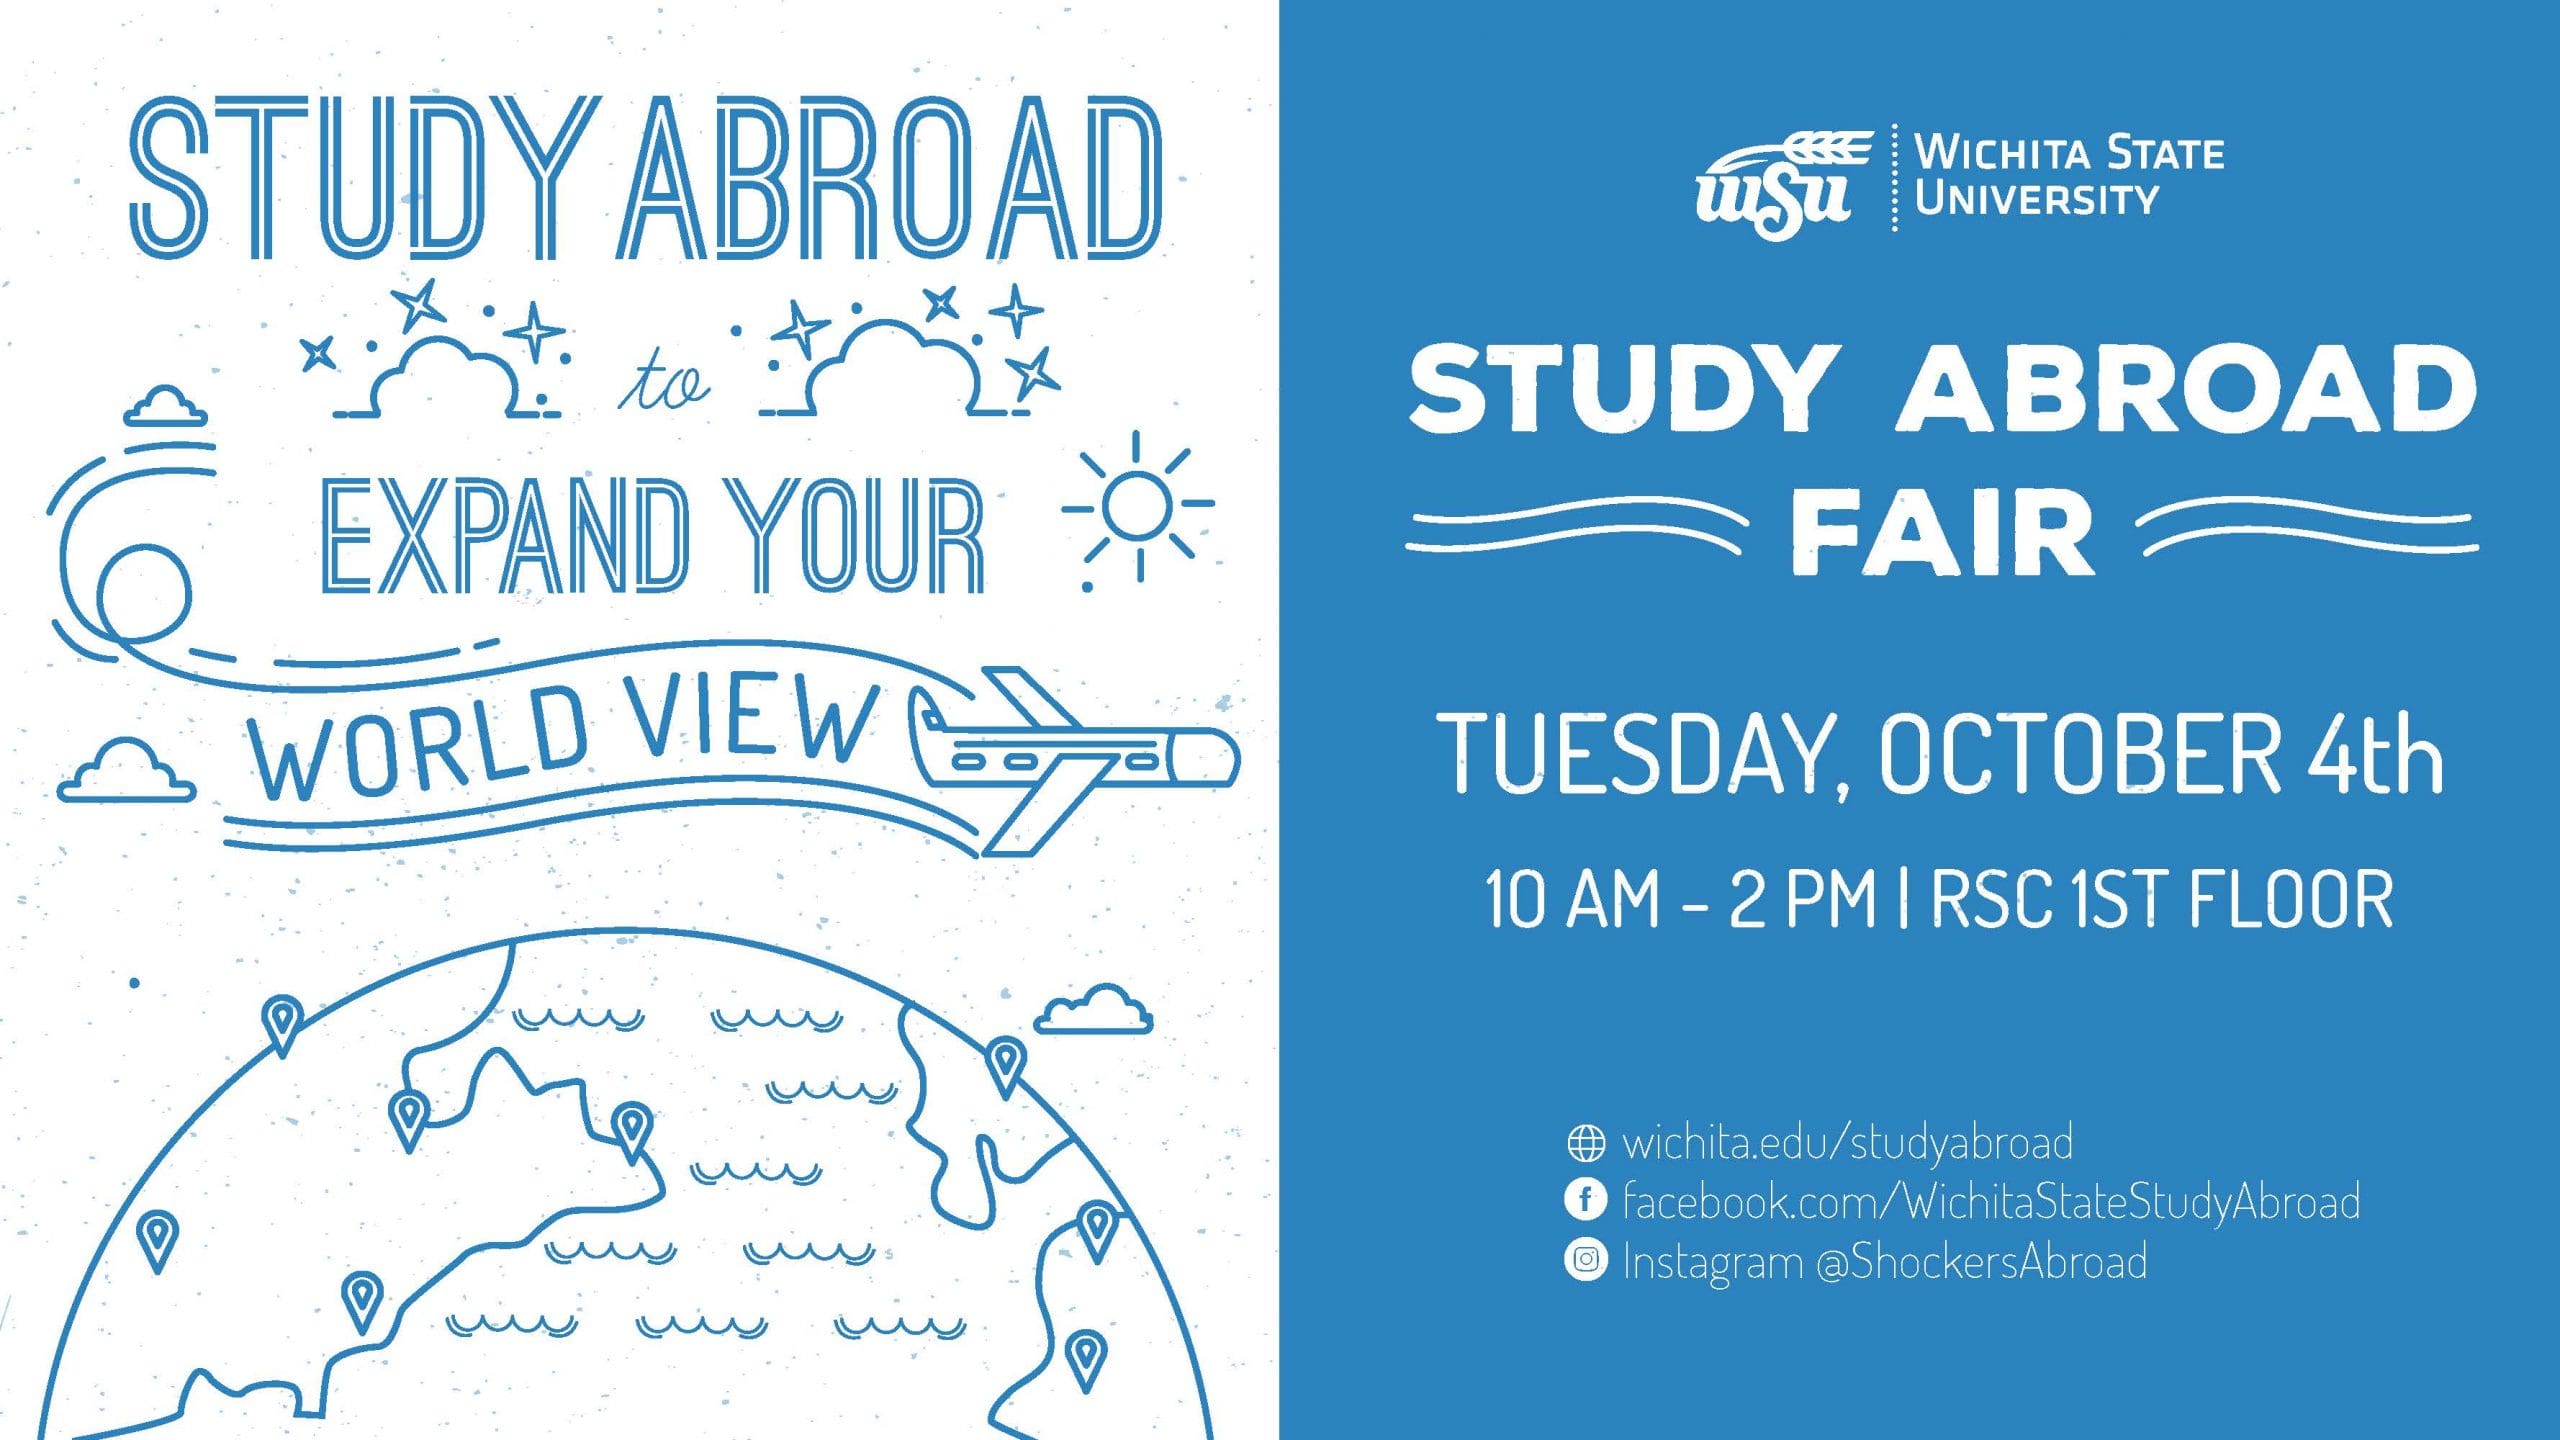 Study Abroad: Expand your World View; Study Abroad Fair Tuesday, October 4th 10 a.m. - 2 p.m. RSC 1st Floor